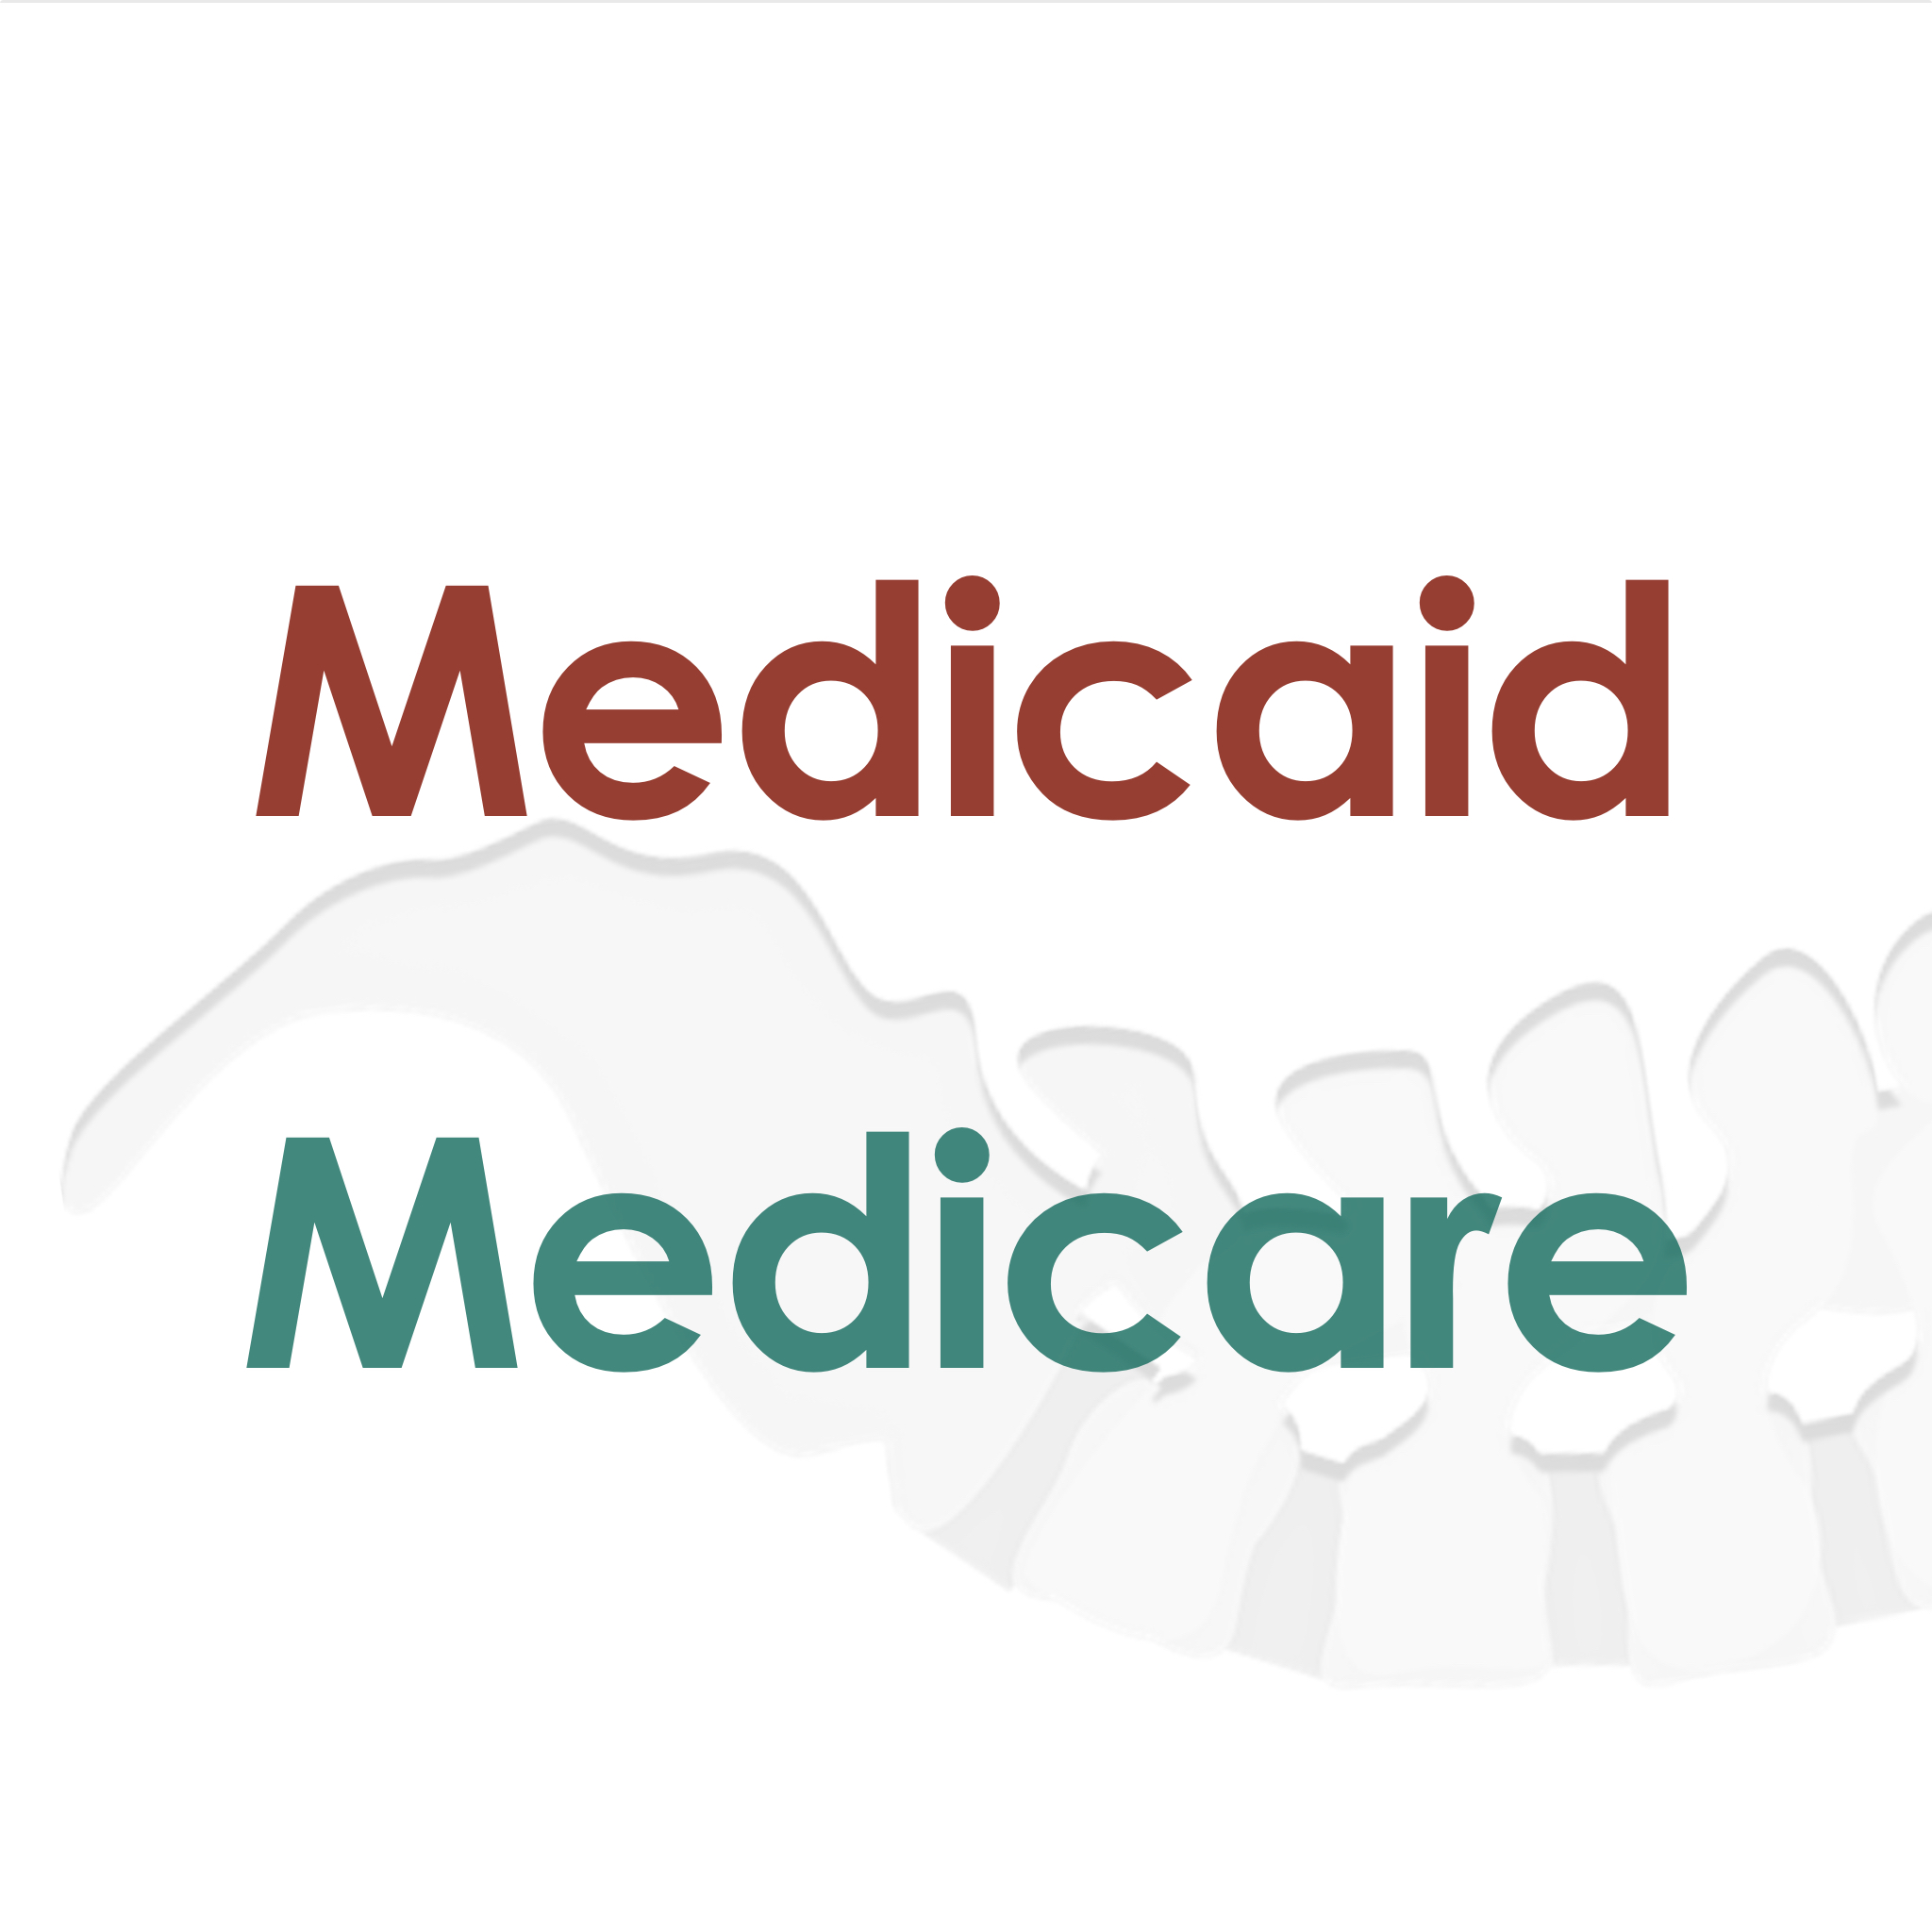 Insurance-Accepted-Medicare-Medicaid